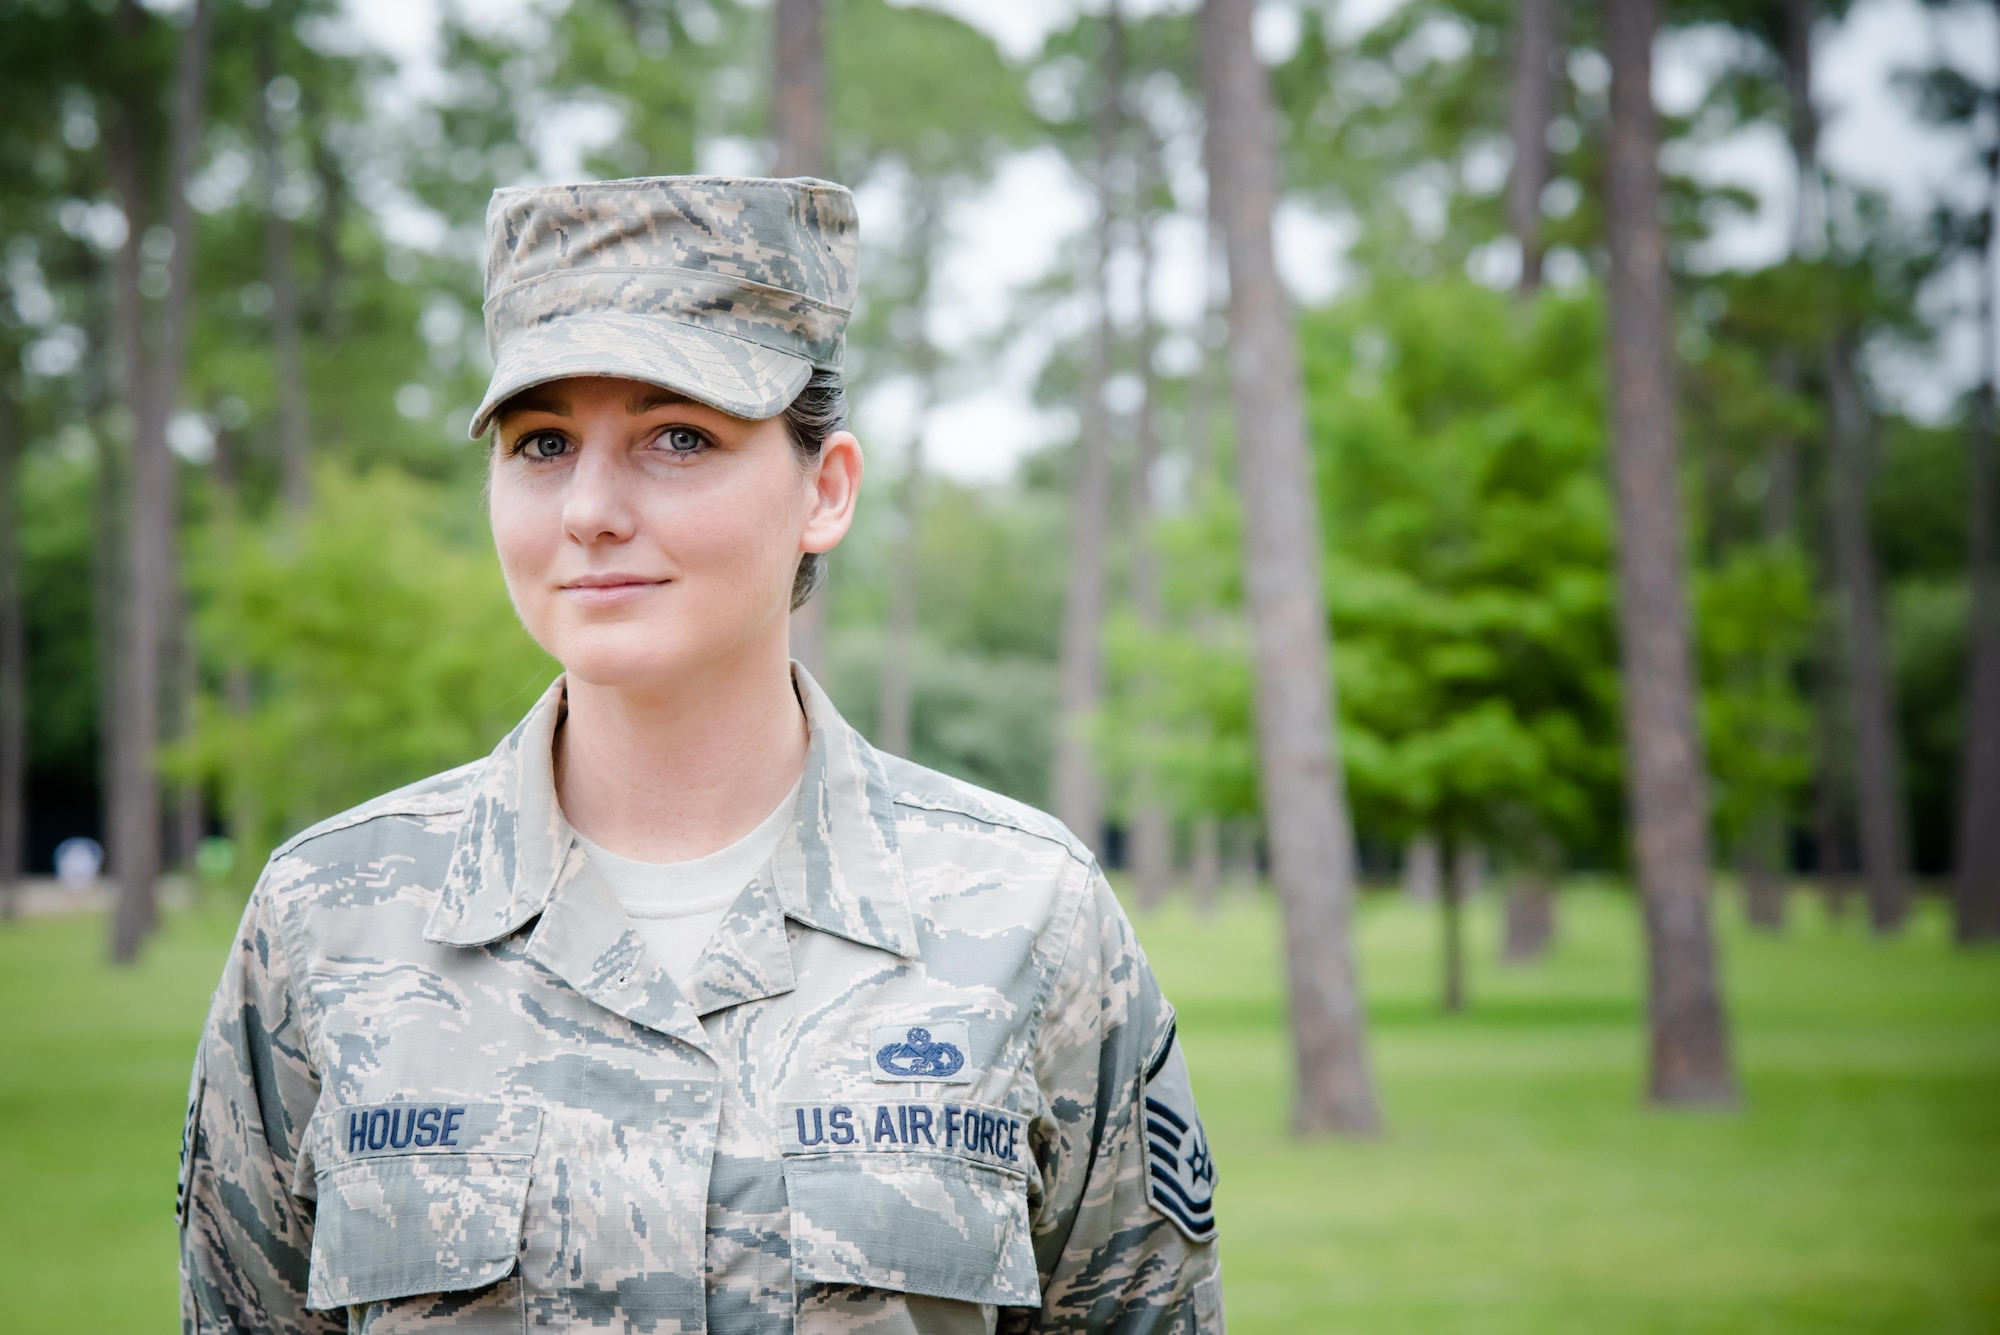 Master Sgt. Sara House, 403rd Developmental and Training Flight coordinator, poses for a photo June 6, 2017 at Keesler Air Force Base, Mississippi. (U.S. Air Force photo/Staff Sgt. Heather Heiney)